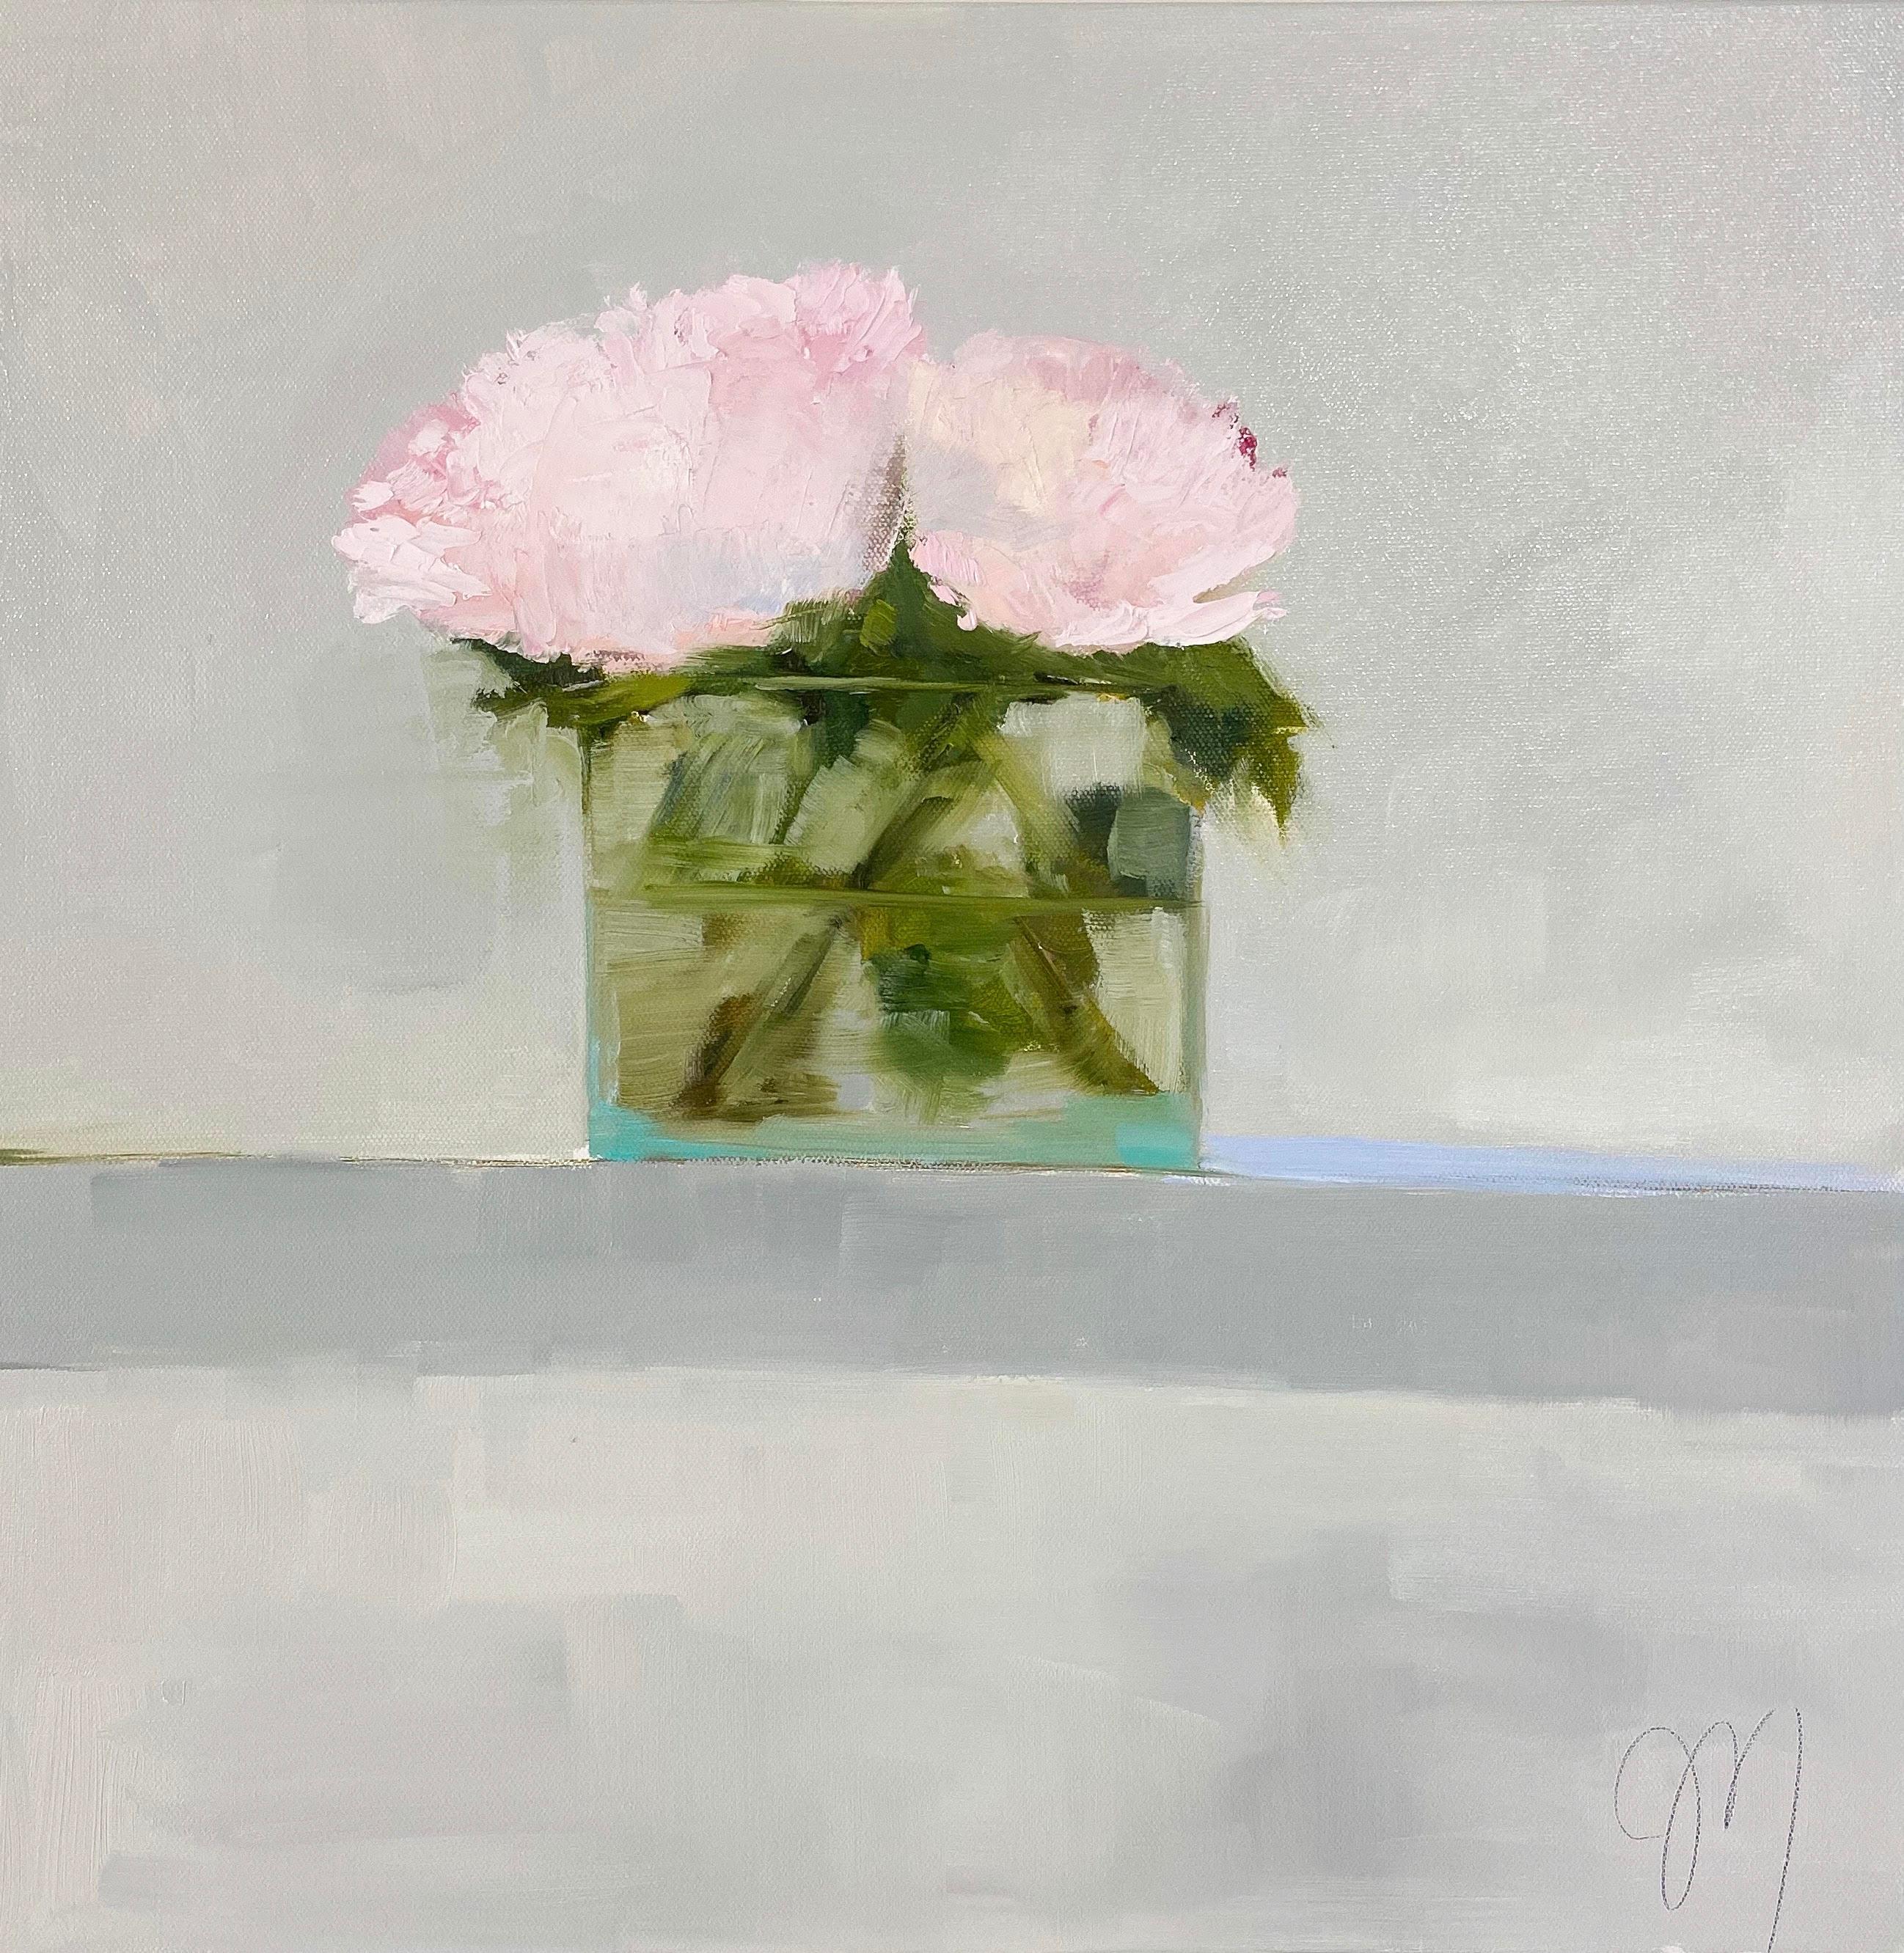 Jill Matthews Still-Life Painting - "Remembering June" impressionist oil painting of pink flowers in a glass vase